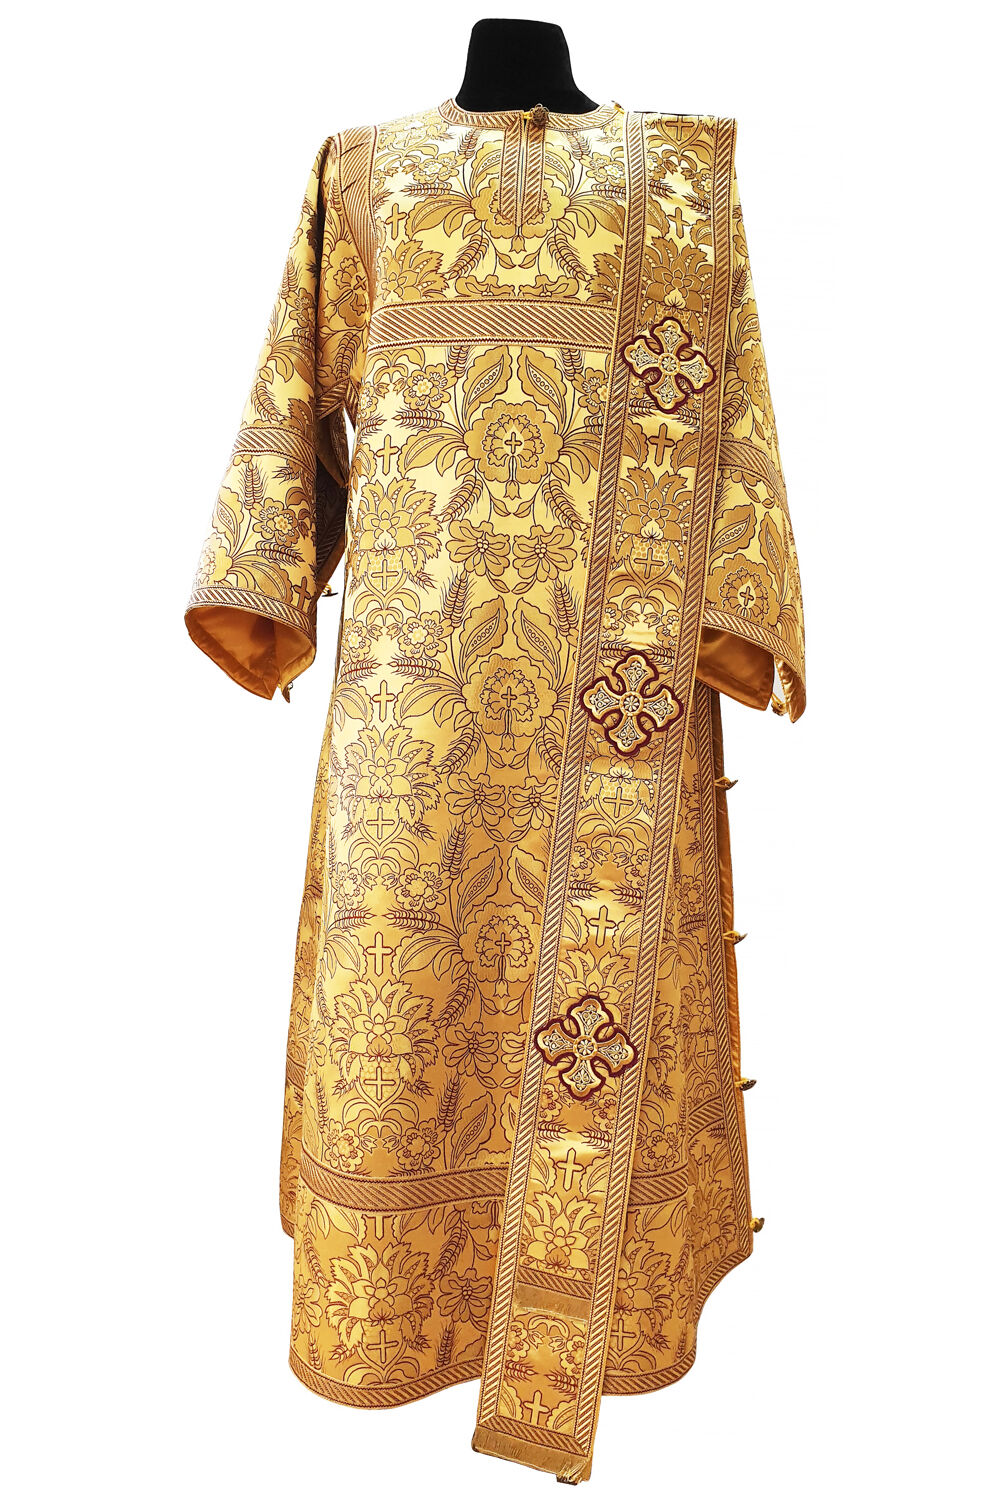 Deacon Vestment yellow with dark-red pattern